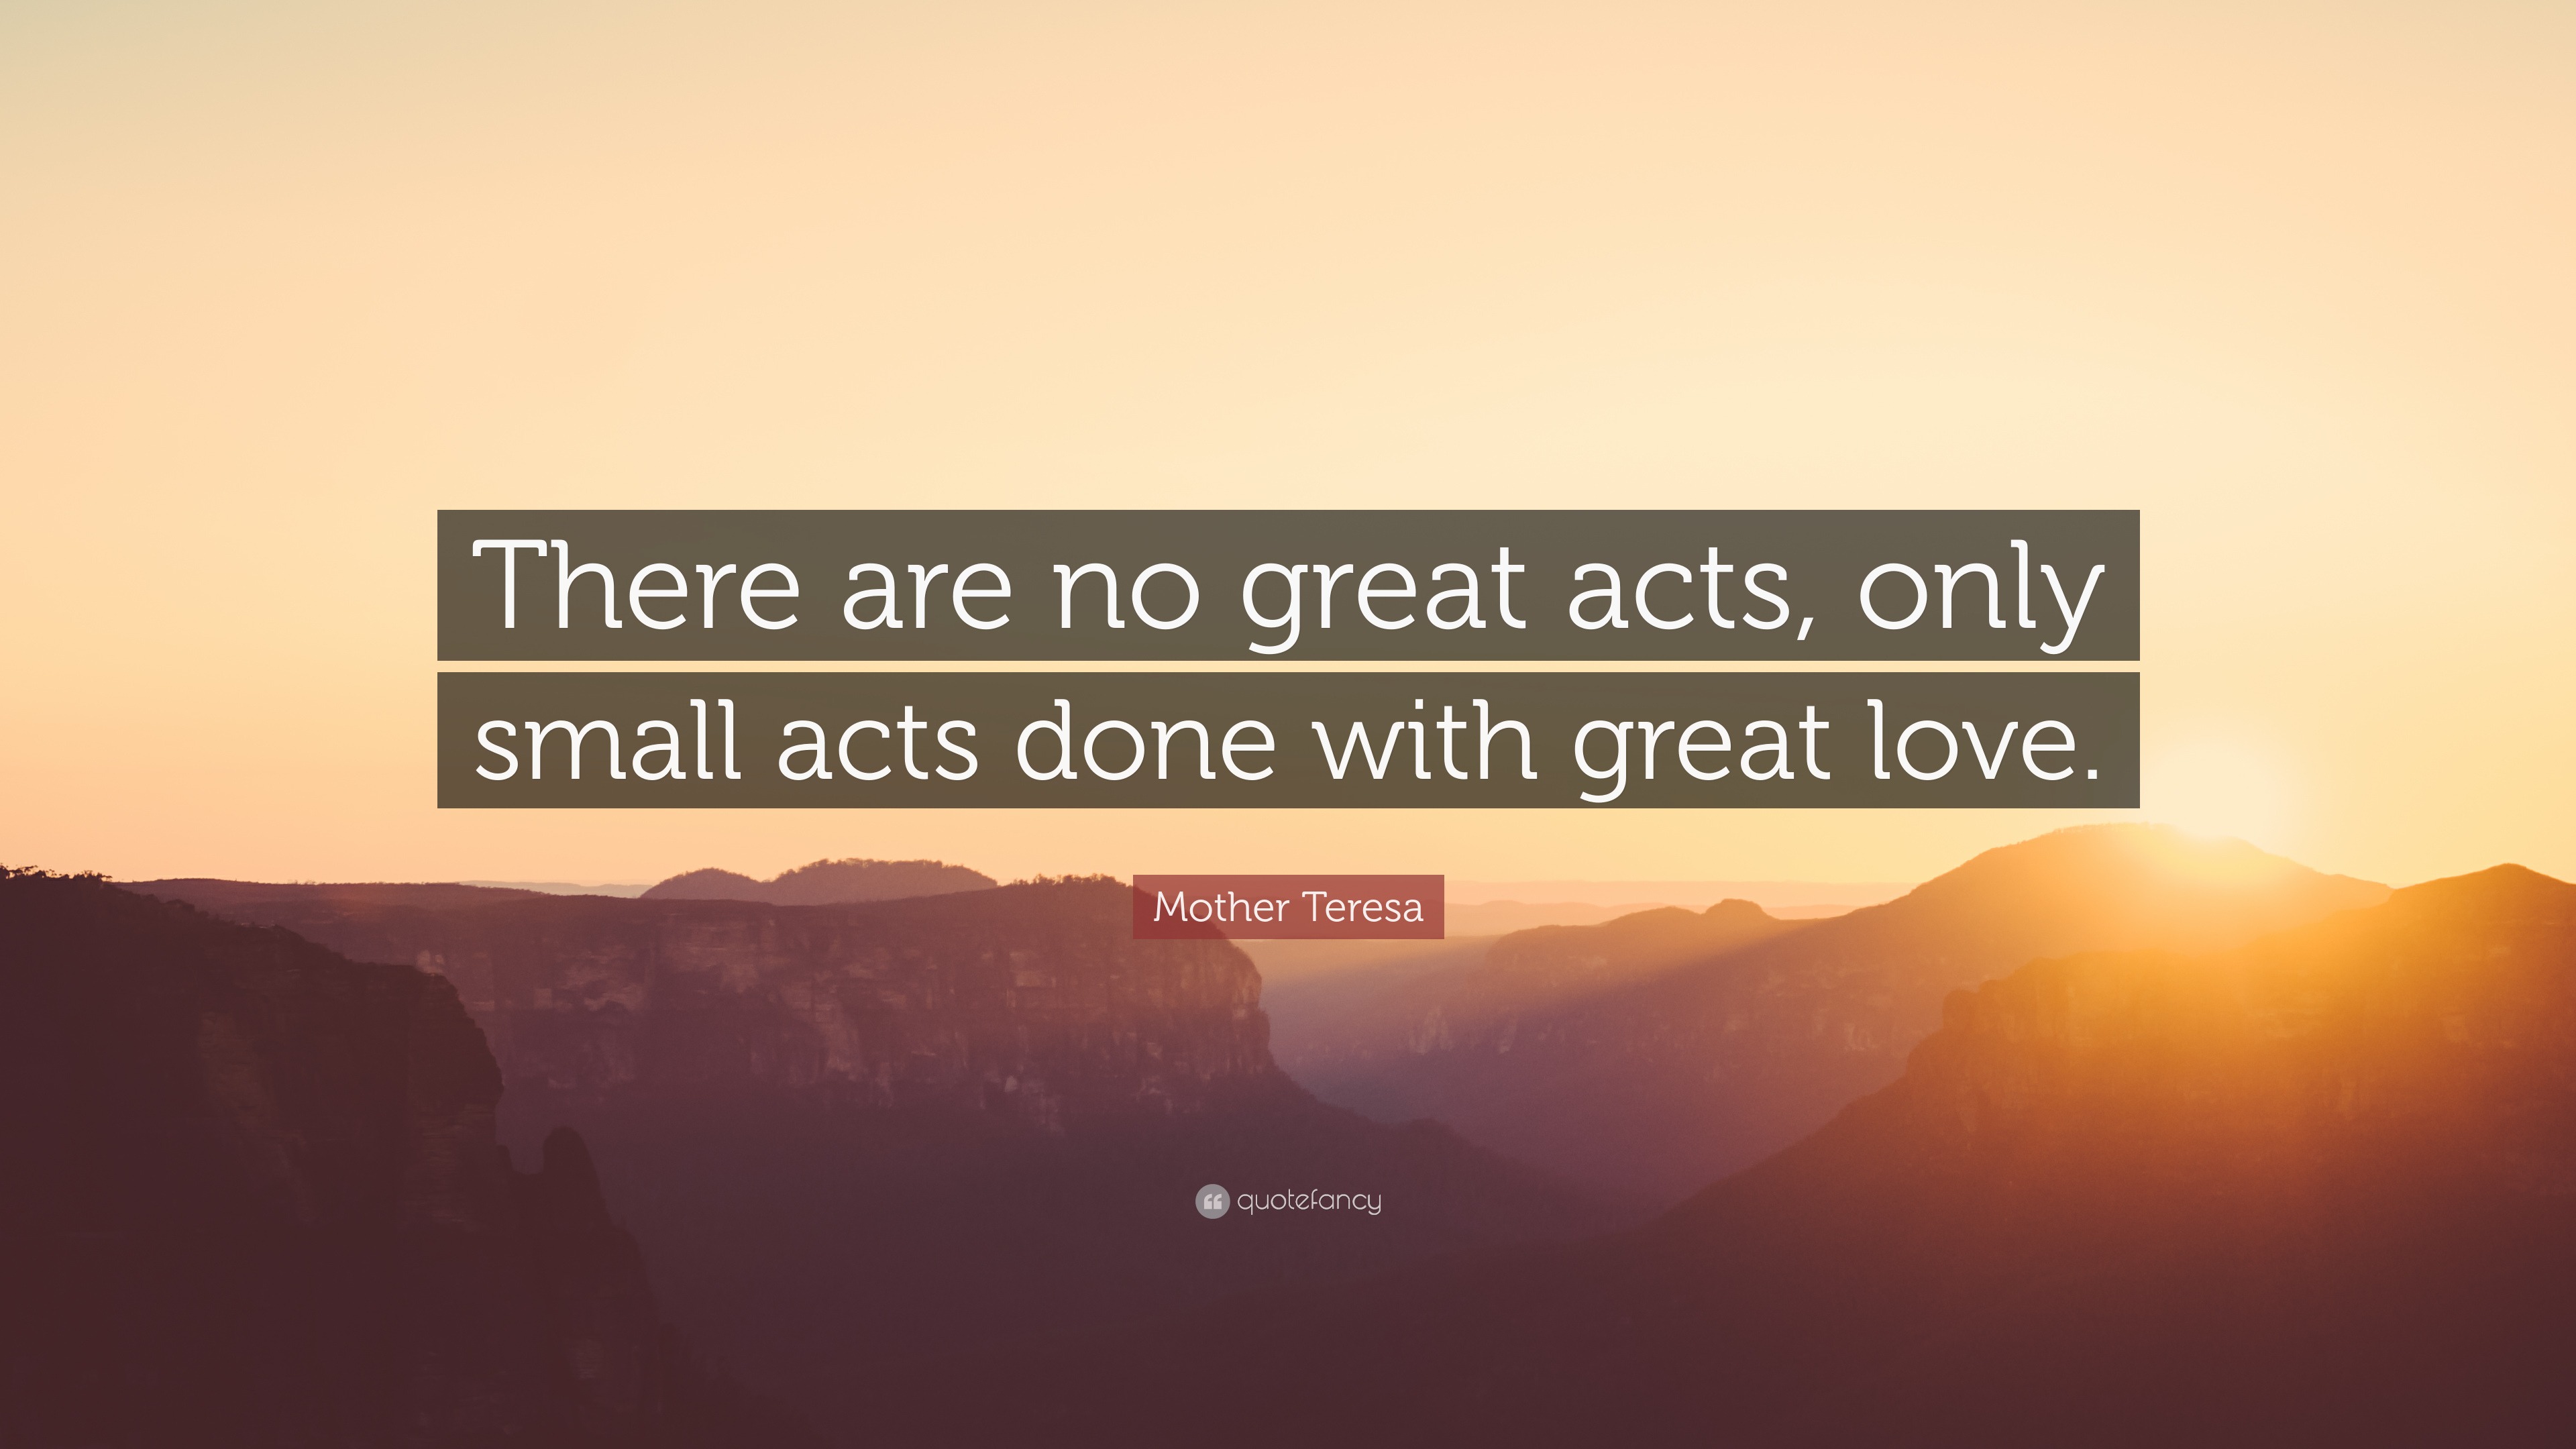 Mother Teresa Quote “There are no great acts only small acts done with